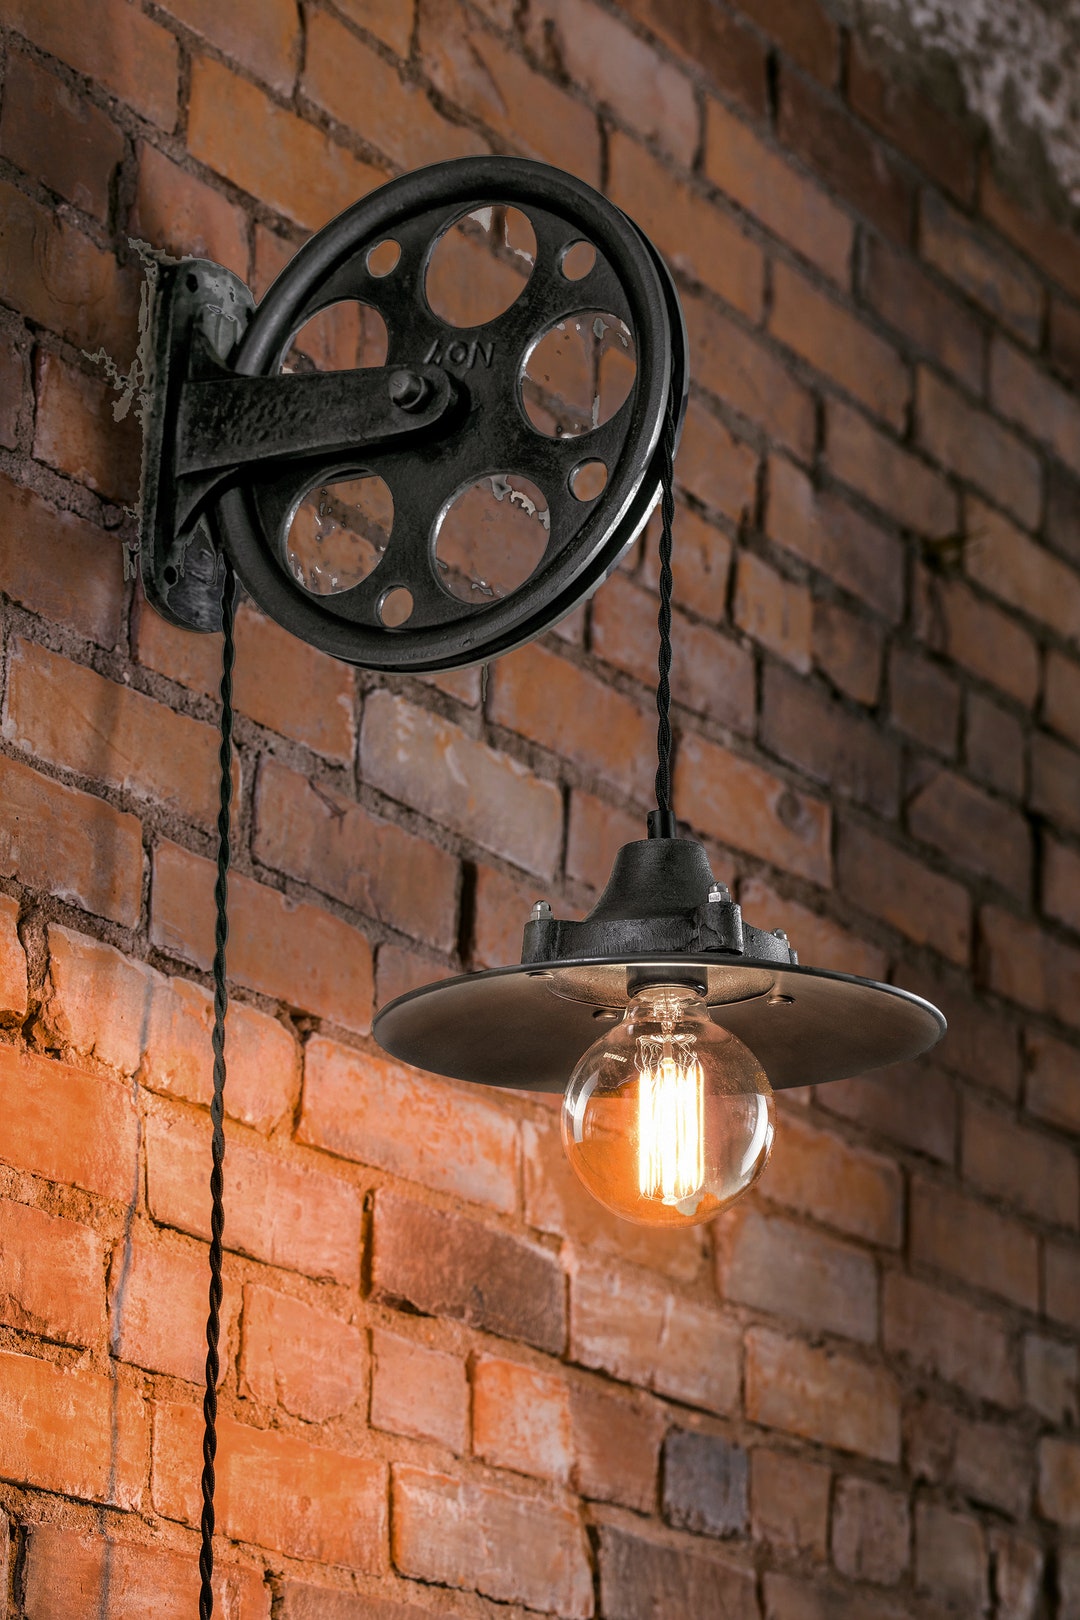 Train Station Wall Pulley Light Vintage Industrial Cast Etsy